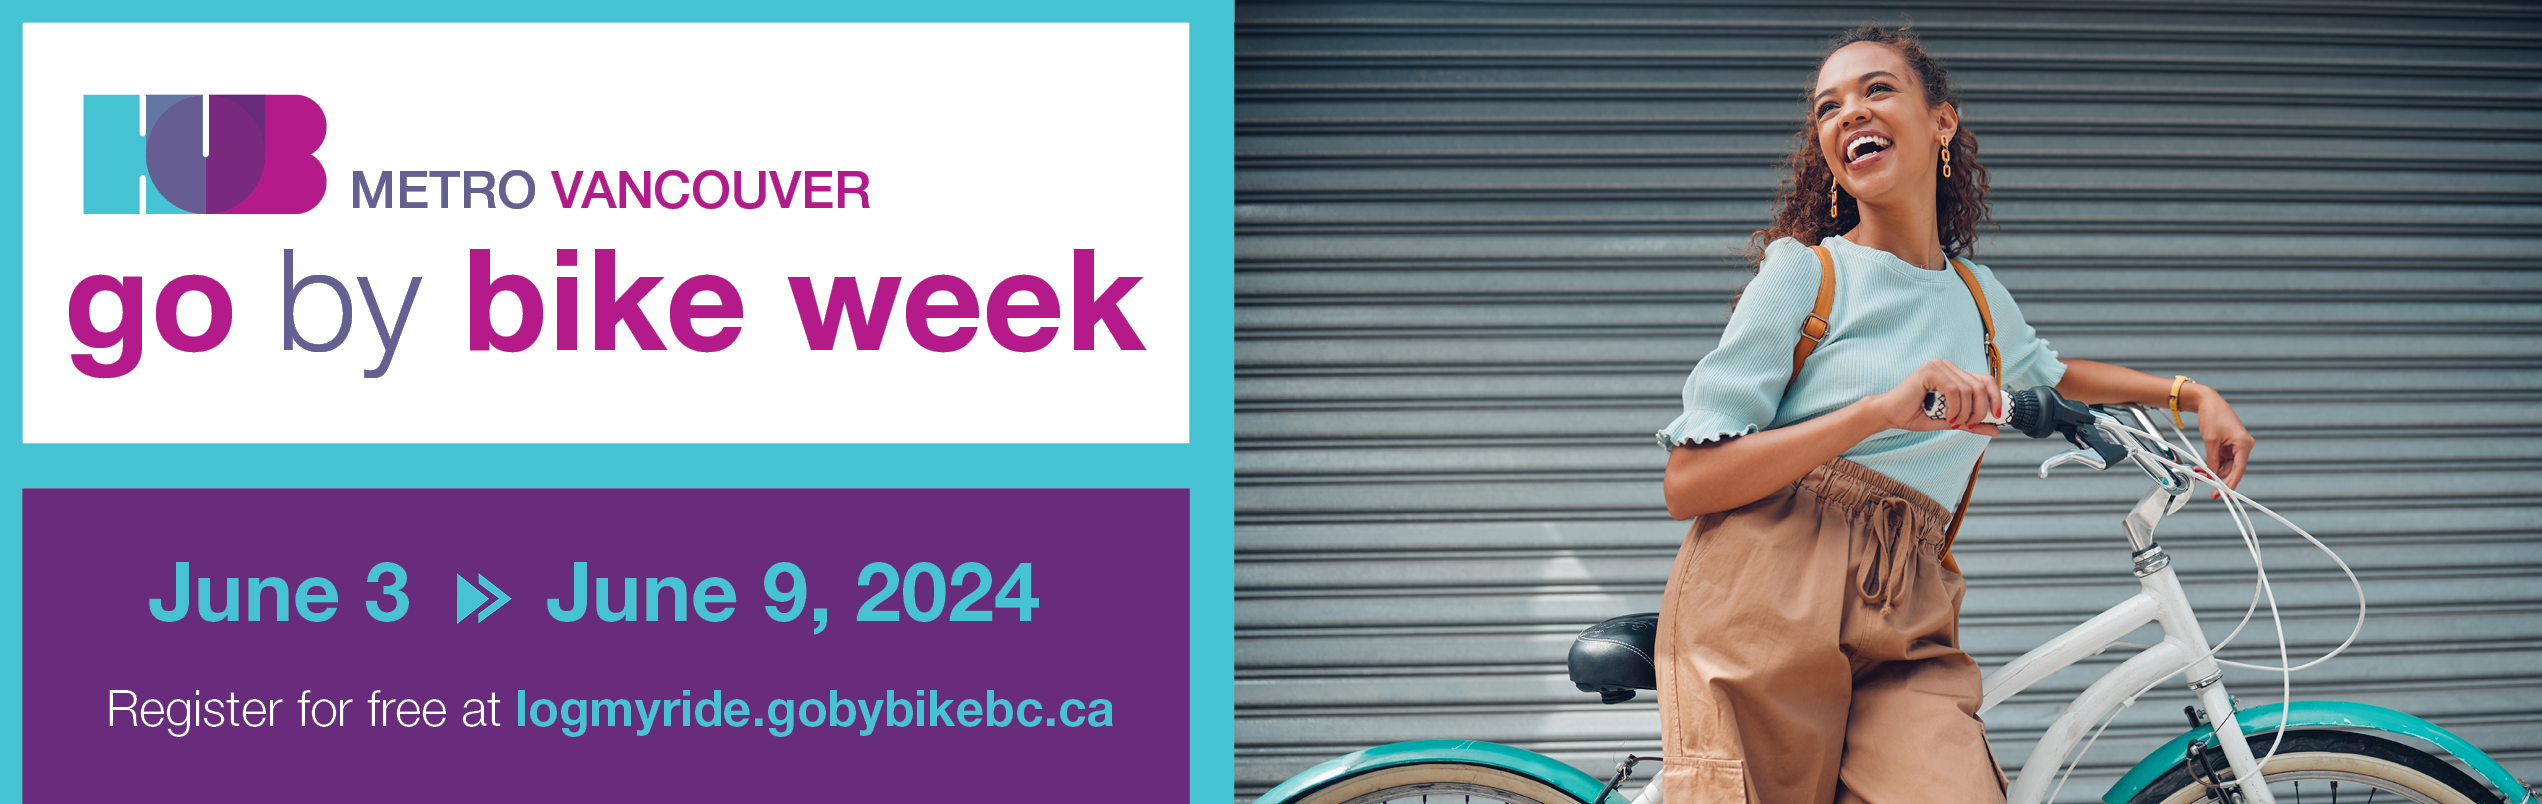 Spring Go by Bike Week Banner. Register for free at logmyride.gobybike.ca. Event dates are June 3-9, 2024.